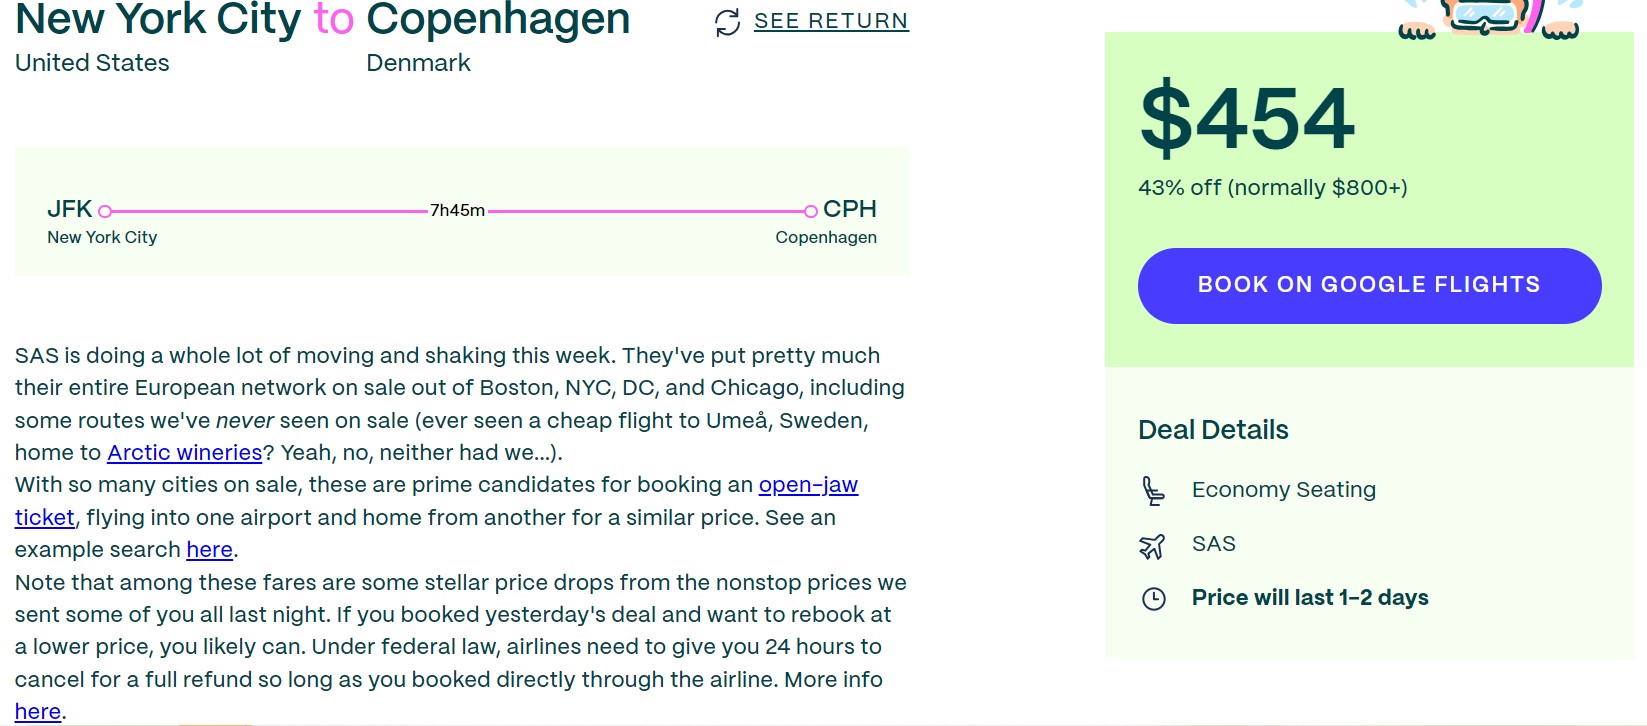 Screenshot from the Going travel website showing a flight deal from NYC to Copenhagen, Denmark